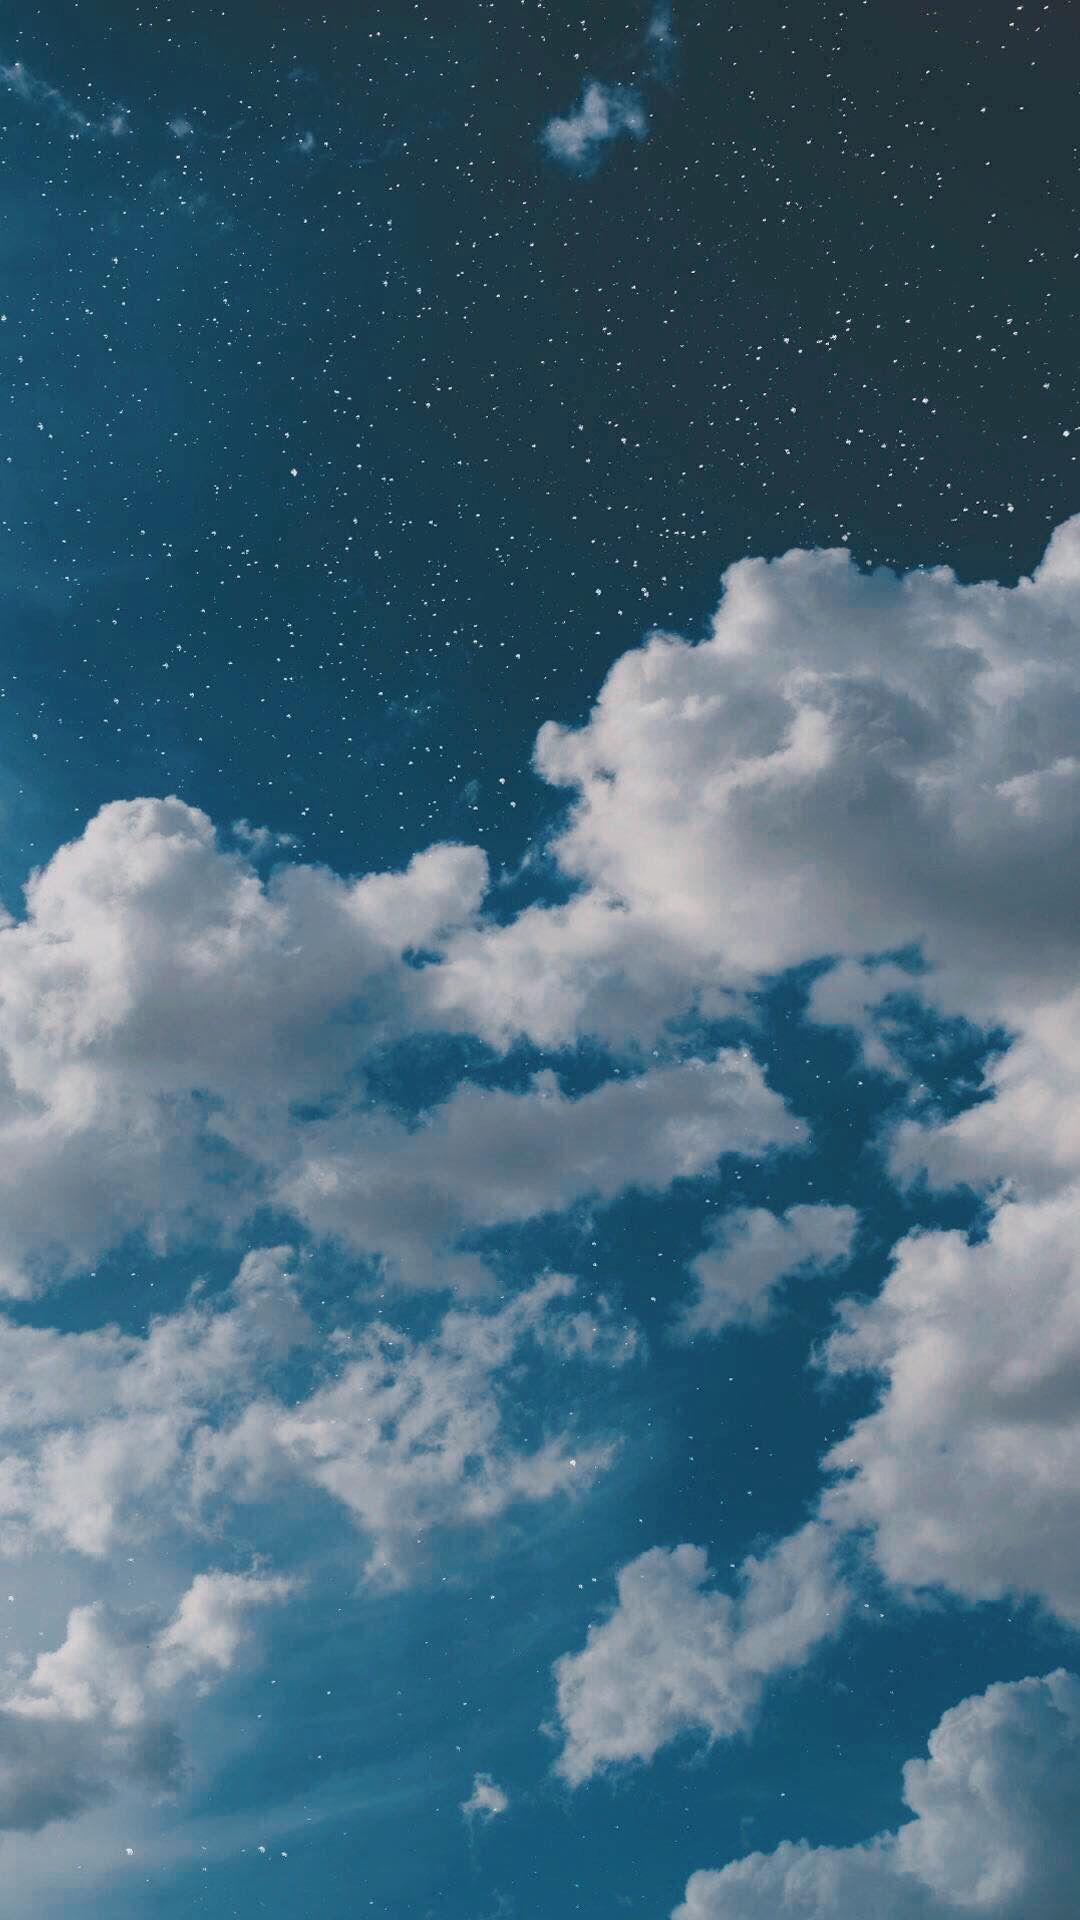 20 Top wallpaper aesthetic night sky You Can Get It Free Of Charge ...